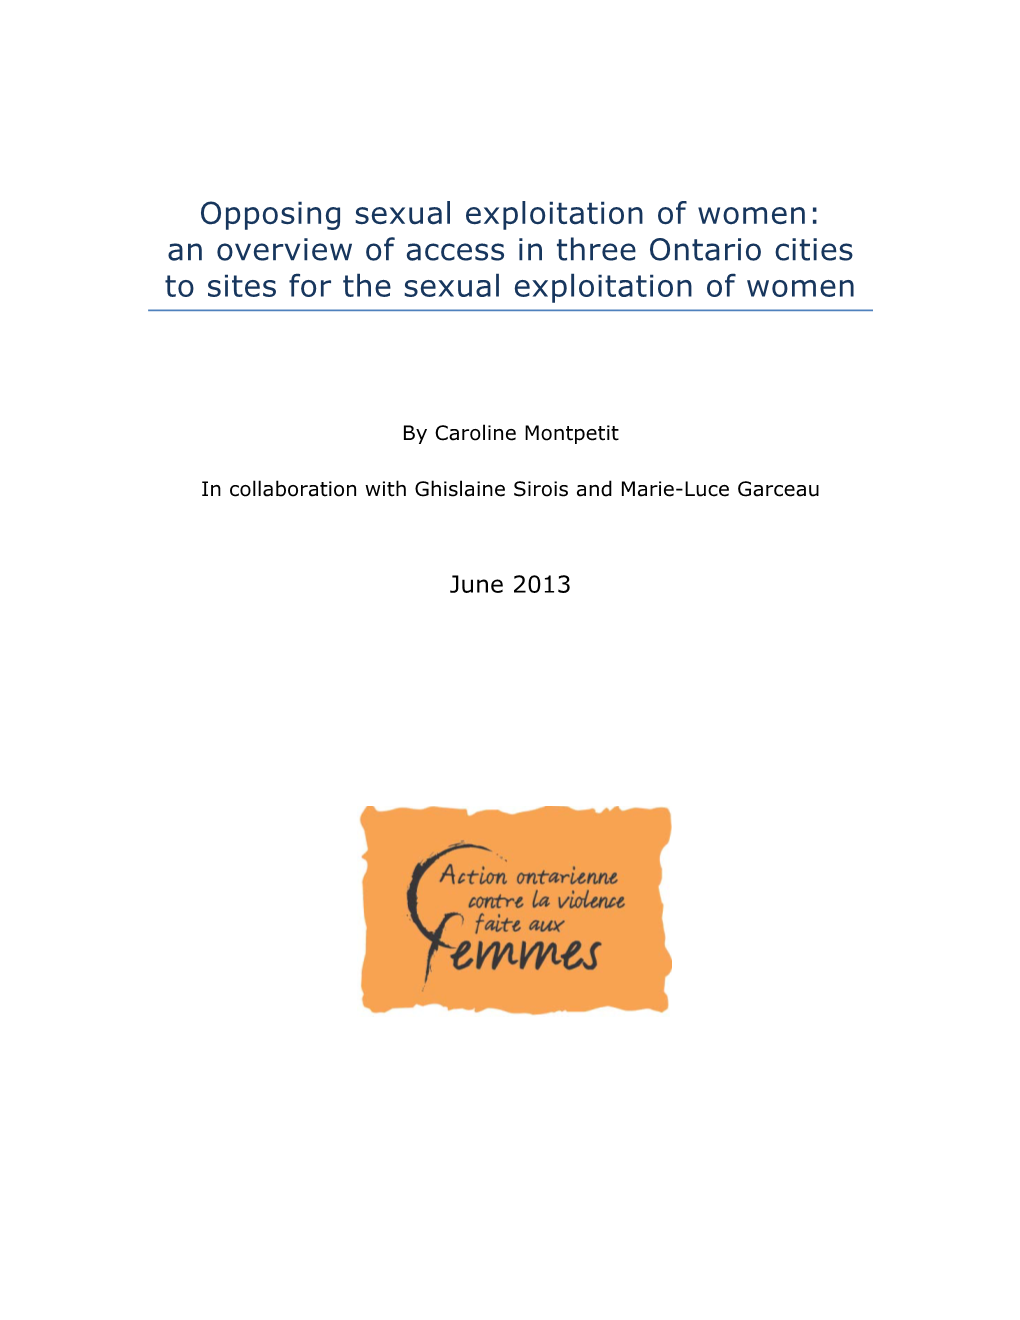 Opposing Sexual Exploitation of Women: an Overview of Access in Three Ontario Cities to Sites for the Sexual Exploitation of Women